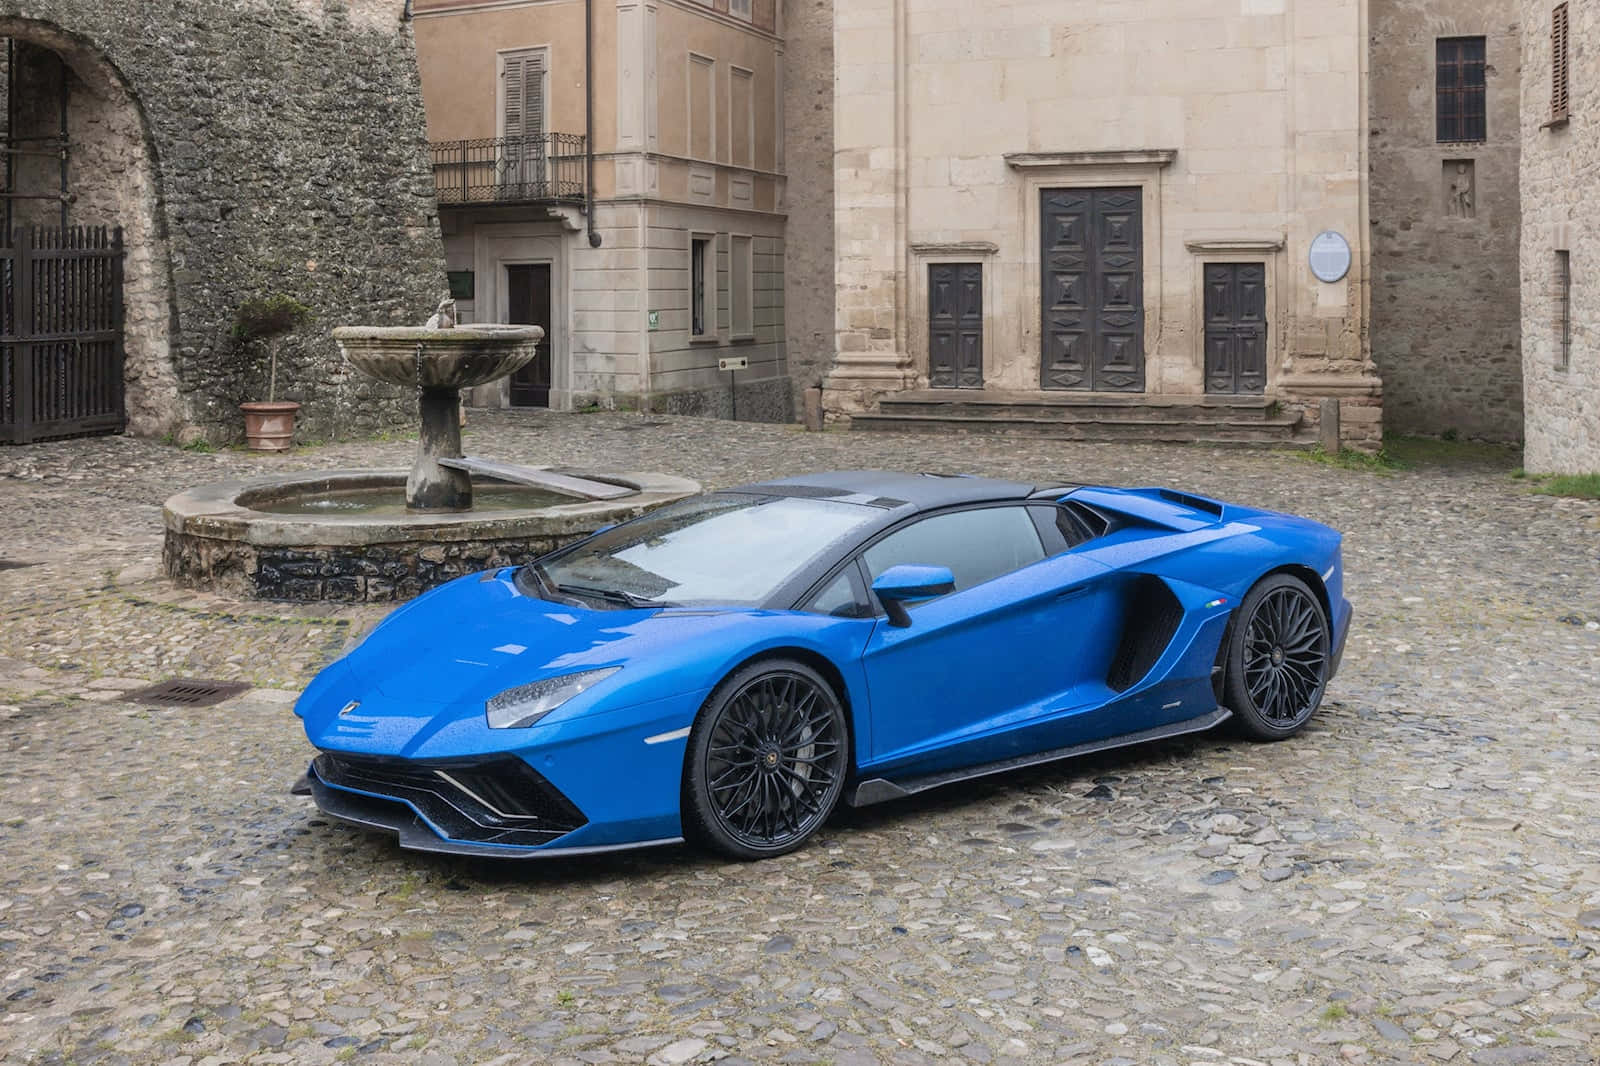 the blue lamborghini huracan is parked in front of a stone building